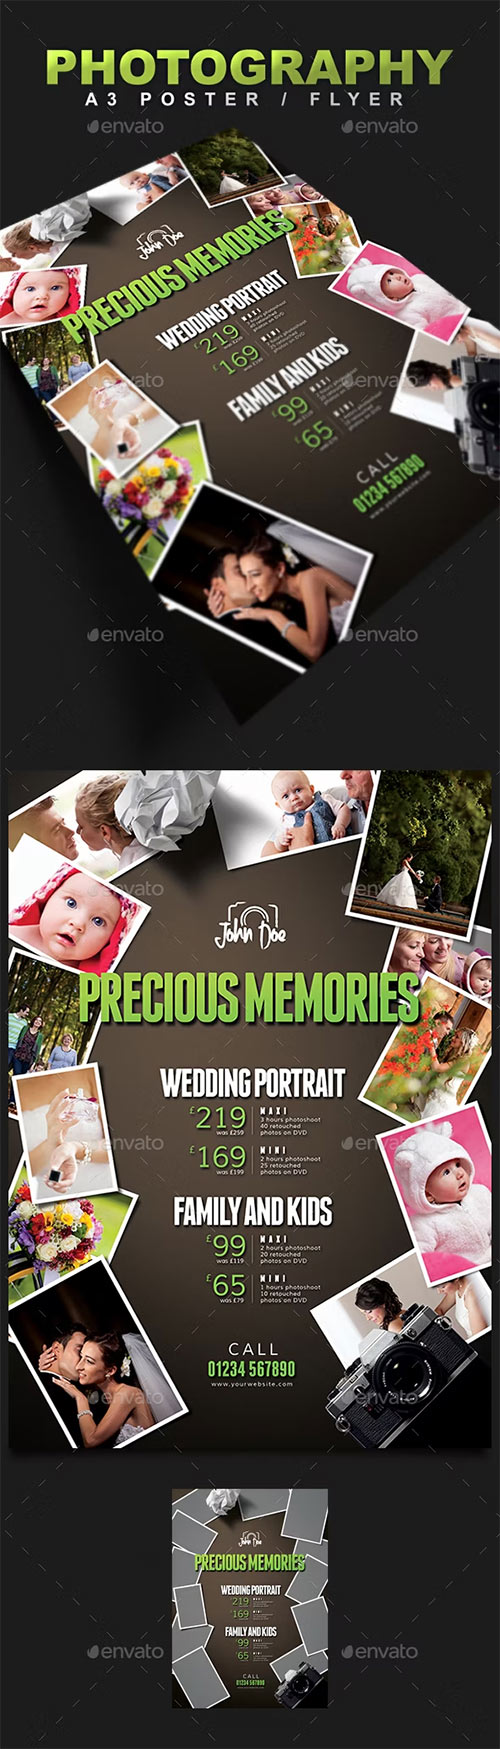 A3 Photography Poster / Flyer 13104483